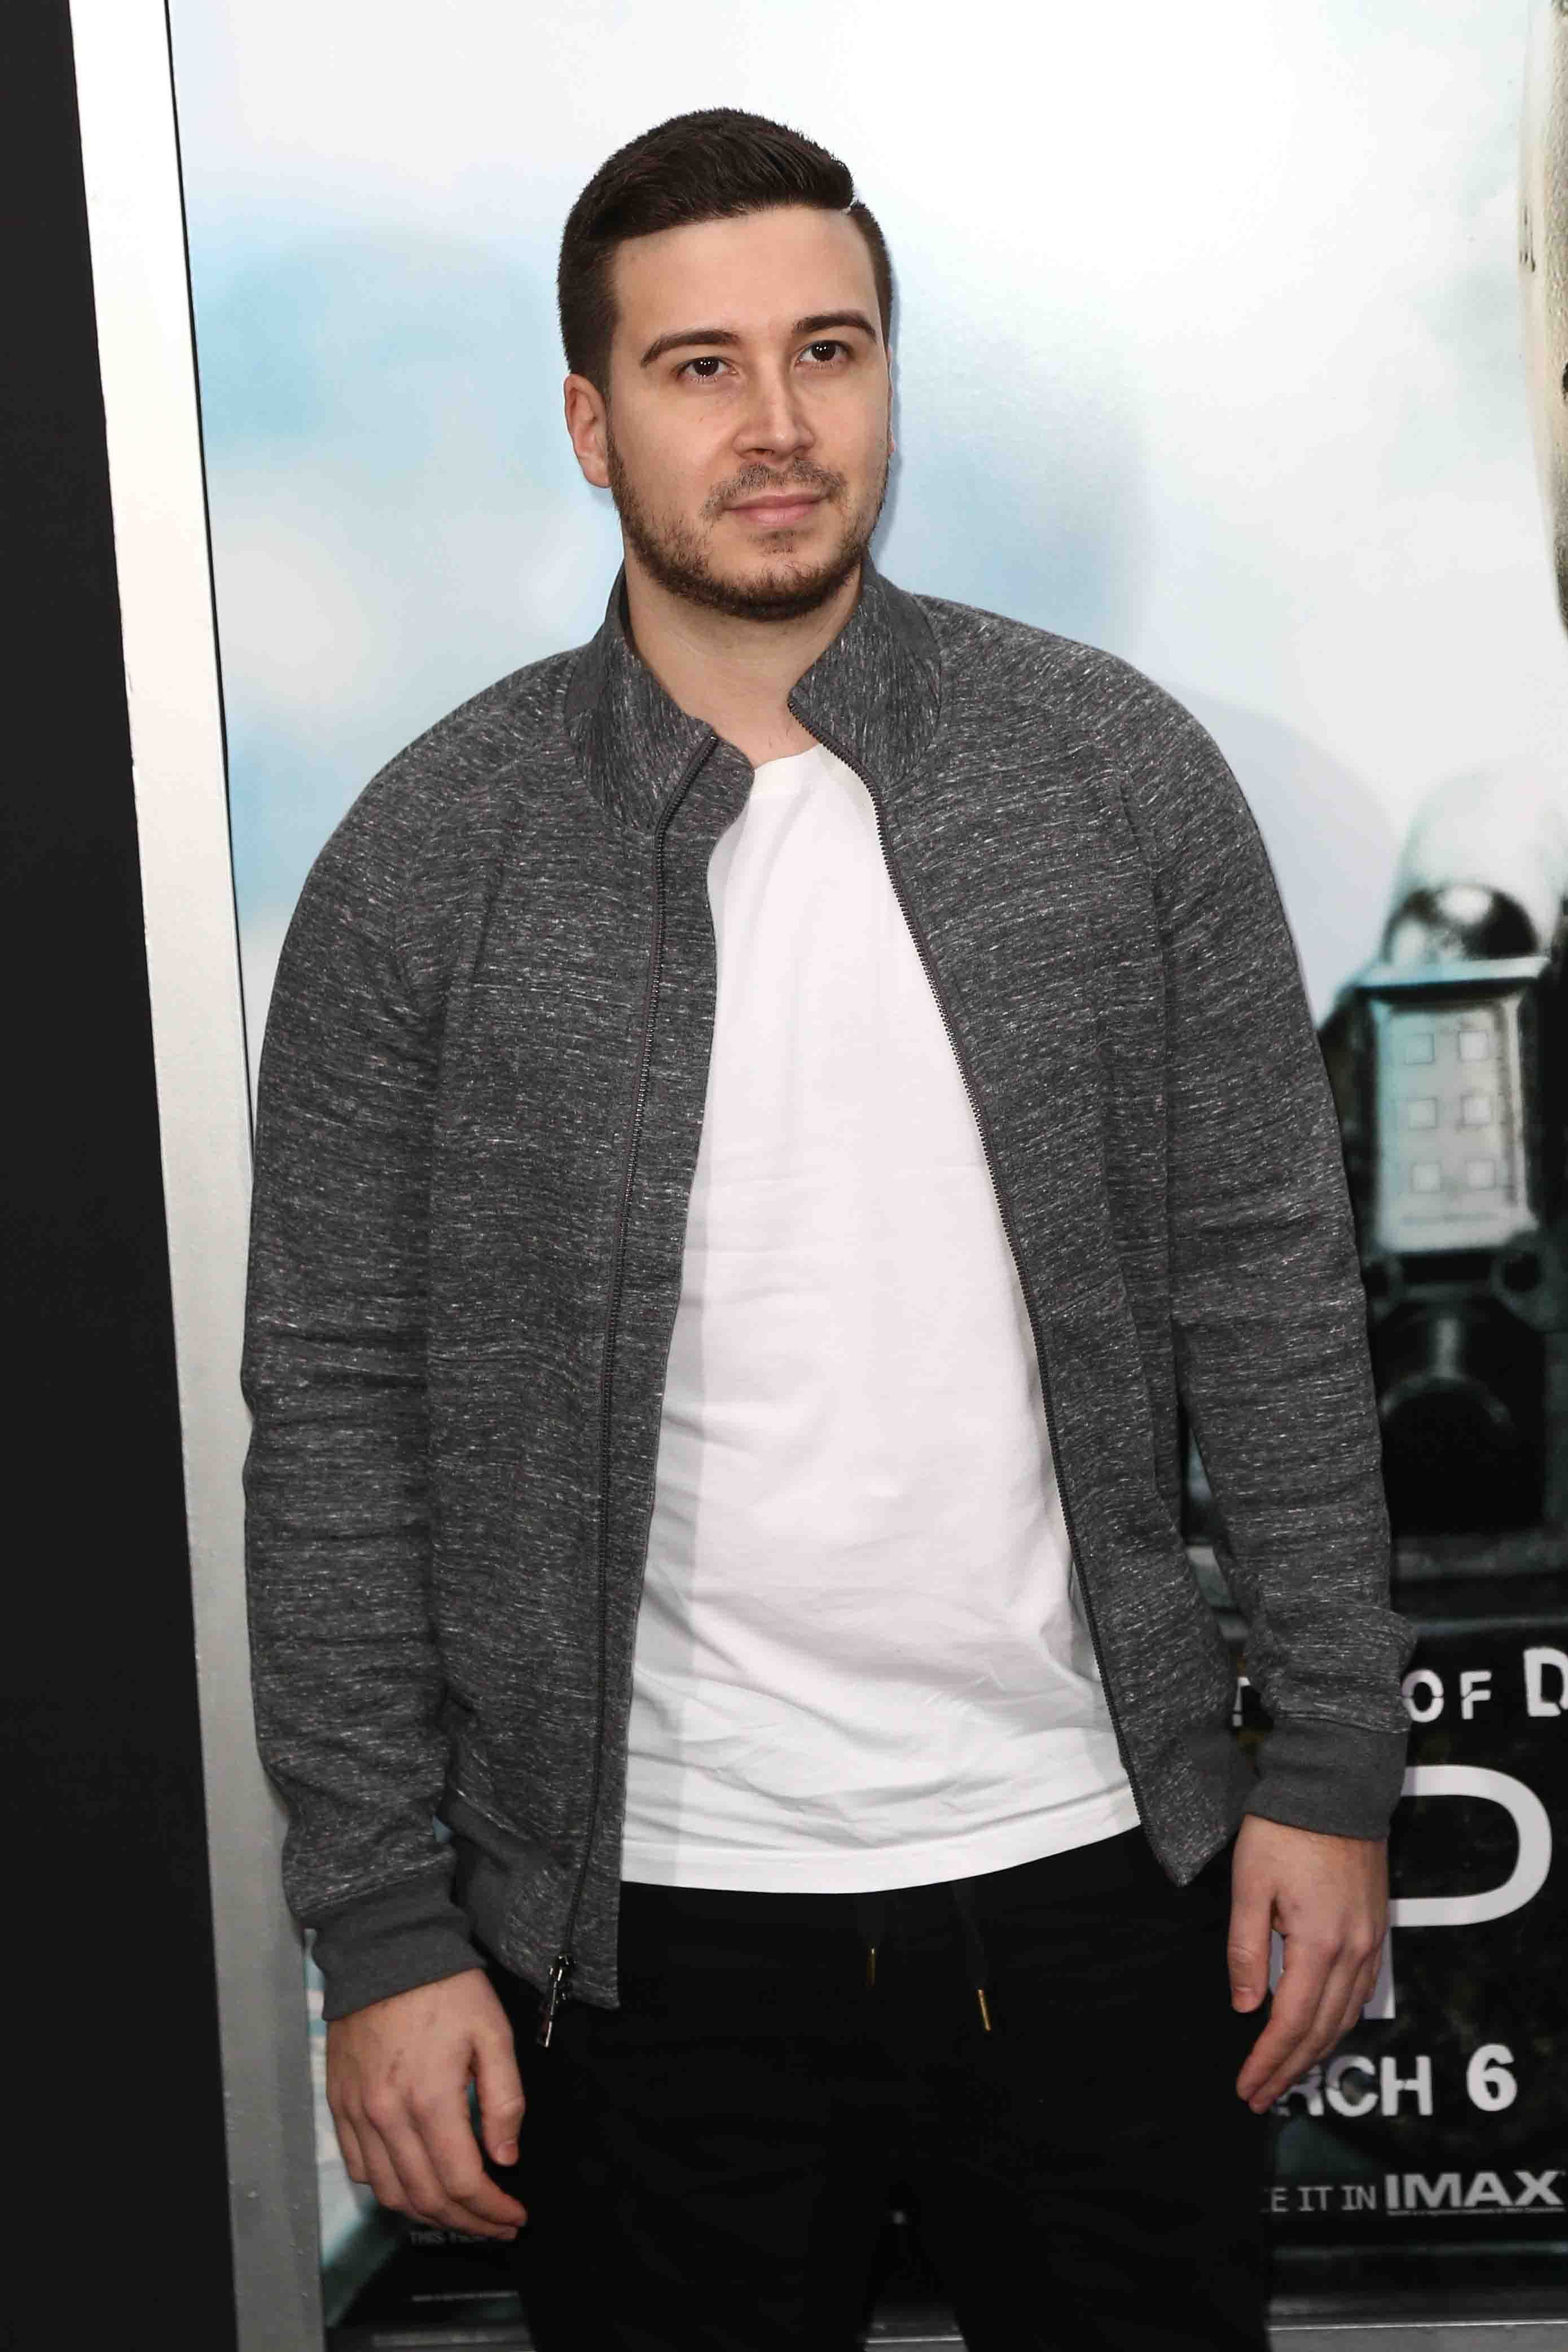 Vinny Guadagnino wears a black jacket and white T-shirt.